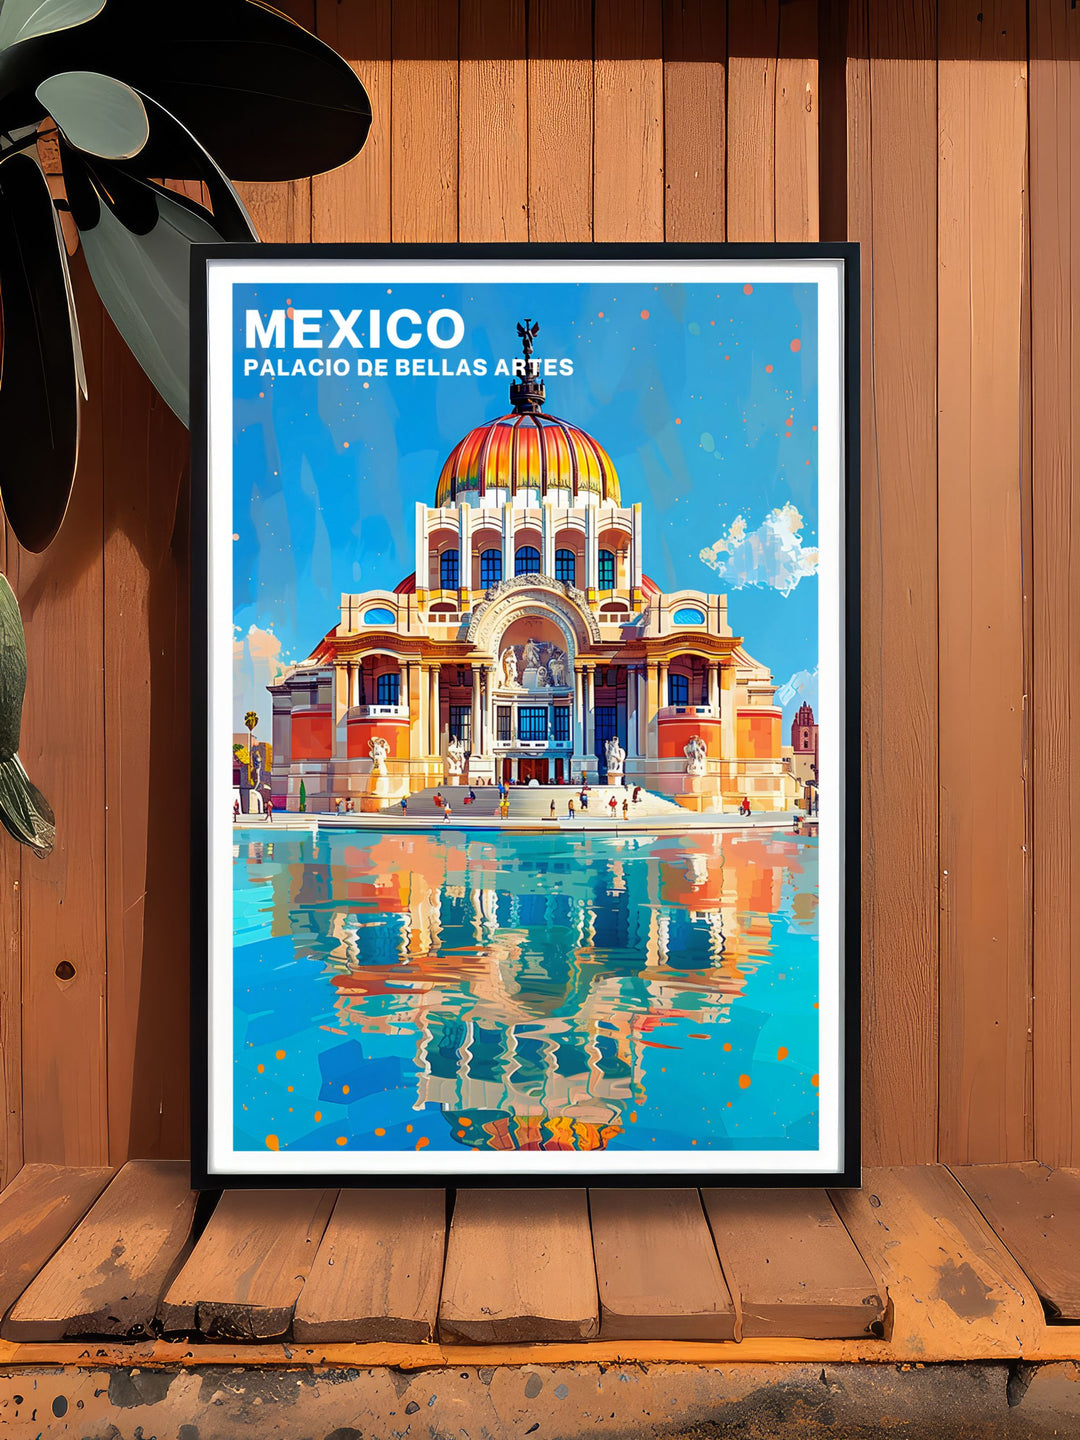 Showcasing both the Palacio de Bellas Artes and Mexico City, this travel poster captures the unique blend of artistic splendor and urban vibrancy, perfect for enhancing your living space with Mexican charm.